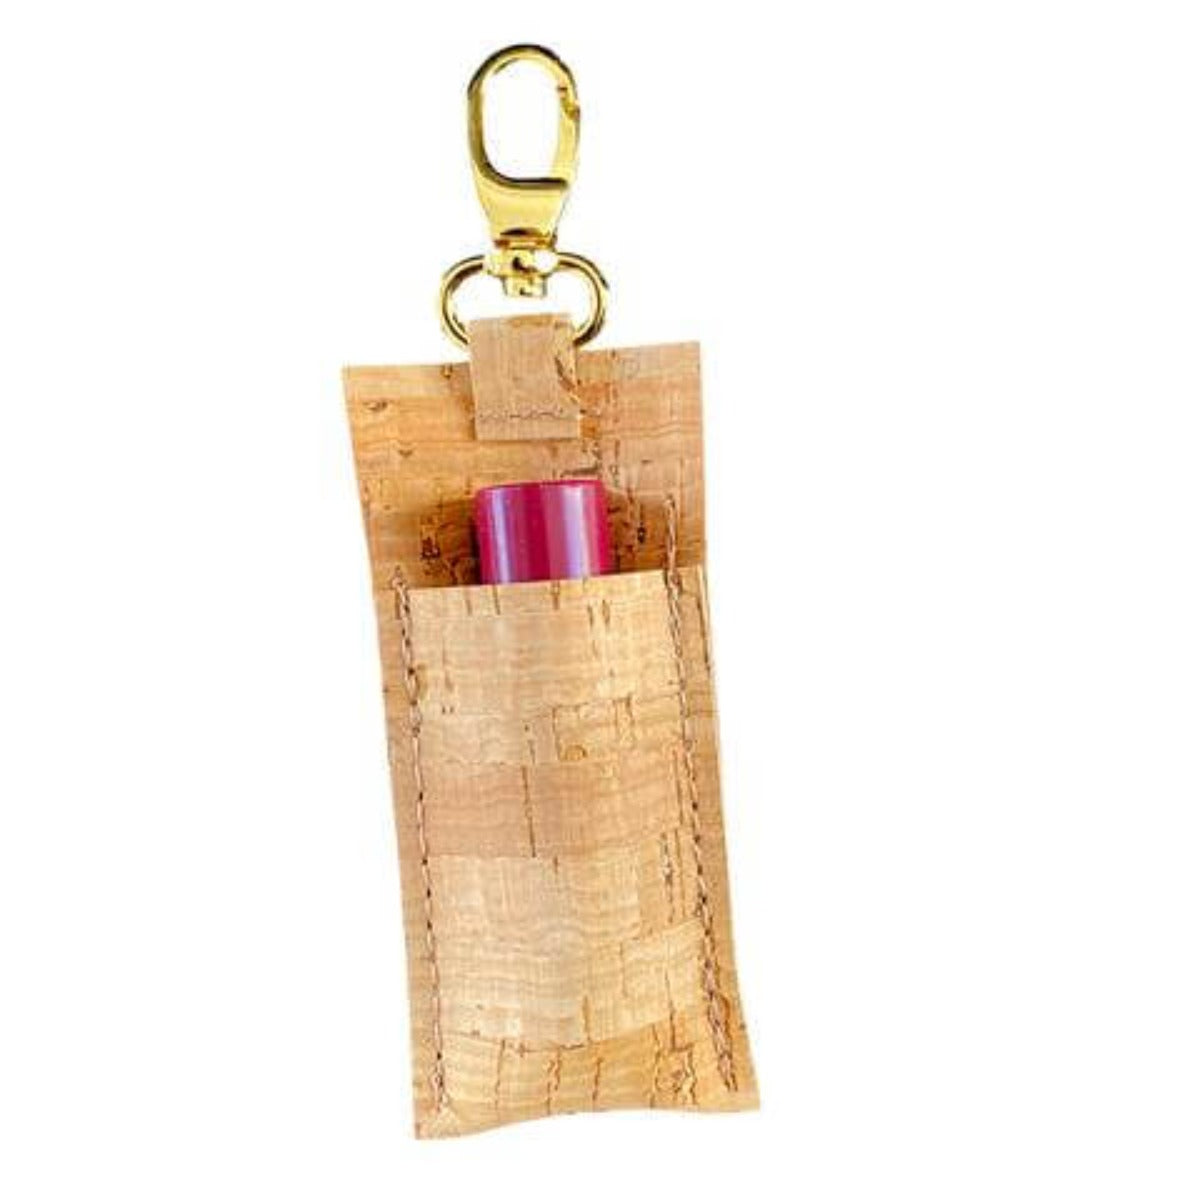 Natalie Therese Cork Lip Balm Holder with Key Ring